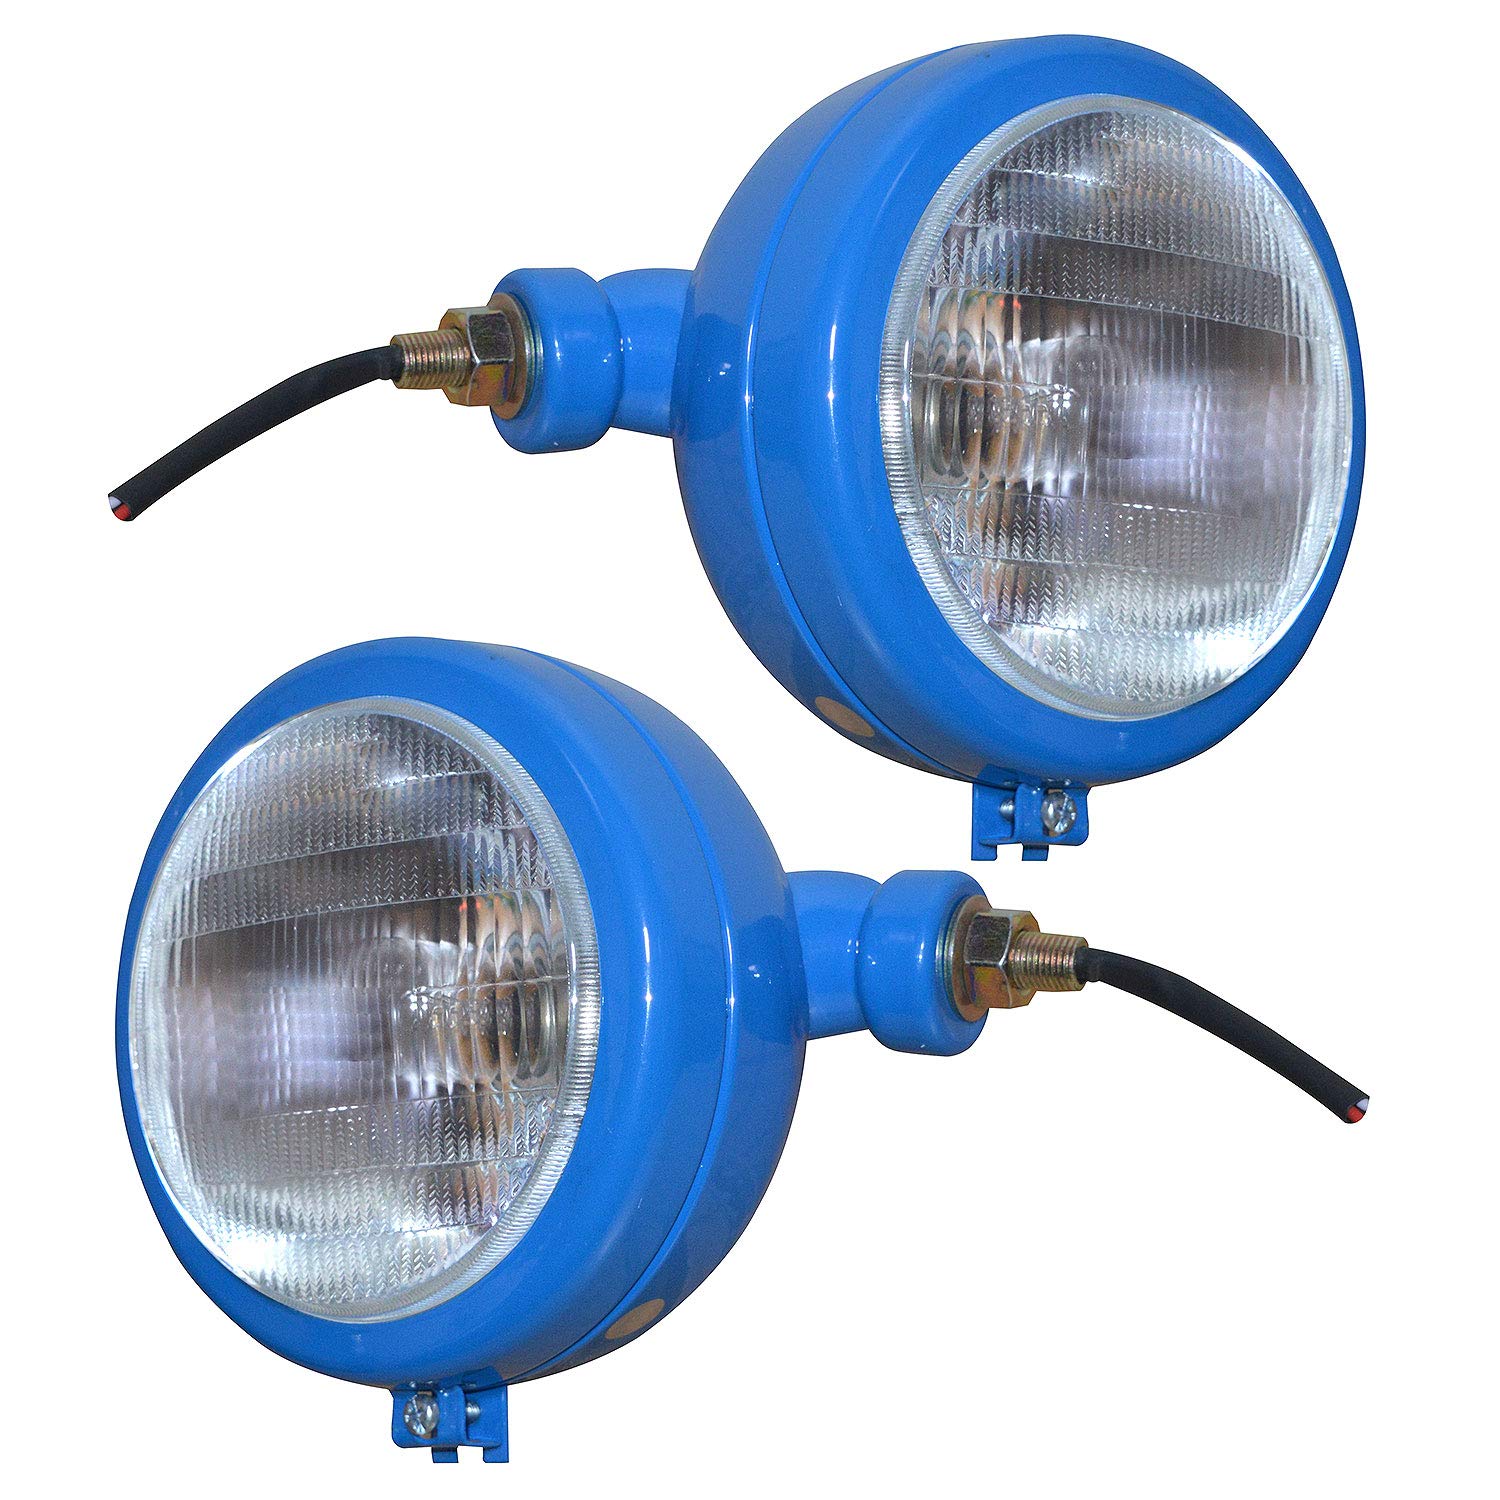 Bajato Light Blue Headlights Assemblies with 12v Bulbs Competitive for David Brown 700 800 900 1200 1400 Series Massey Ferg